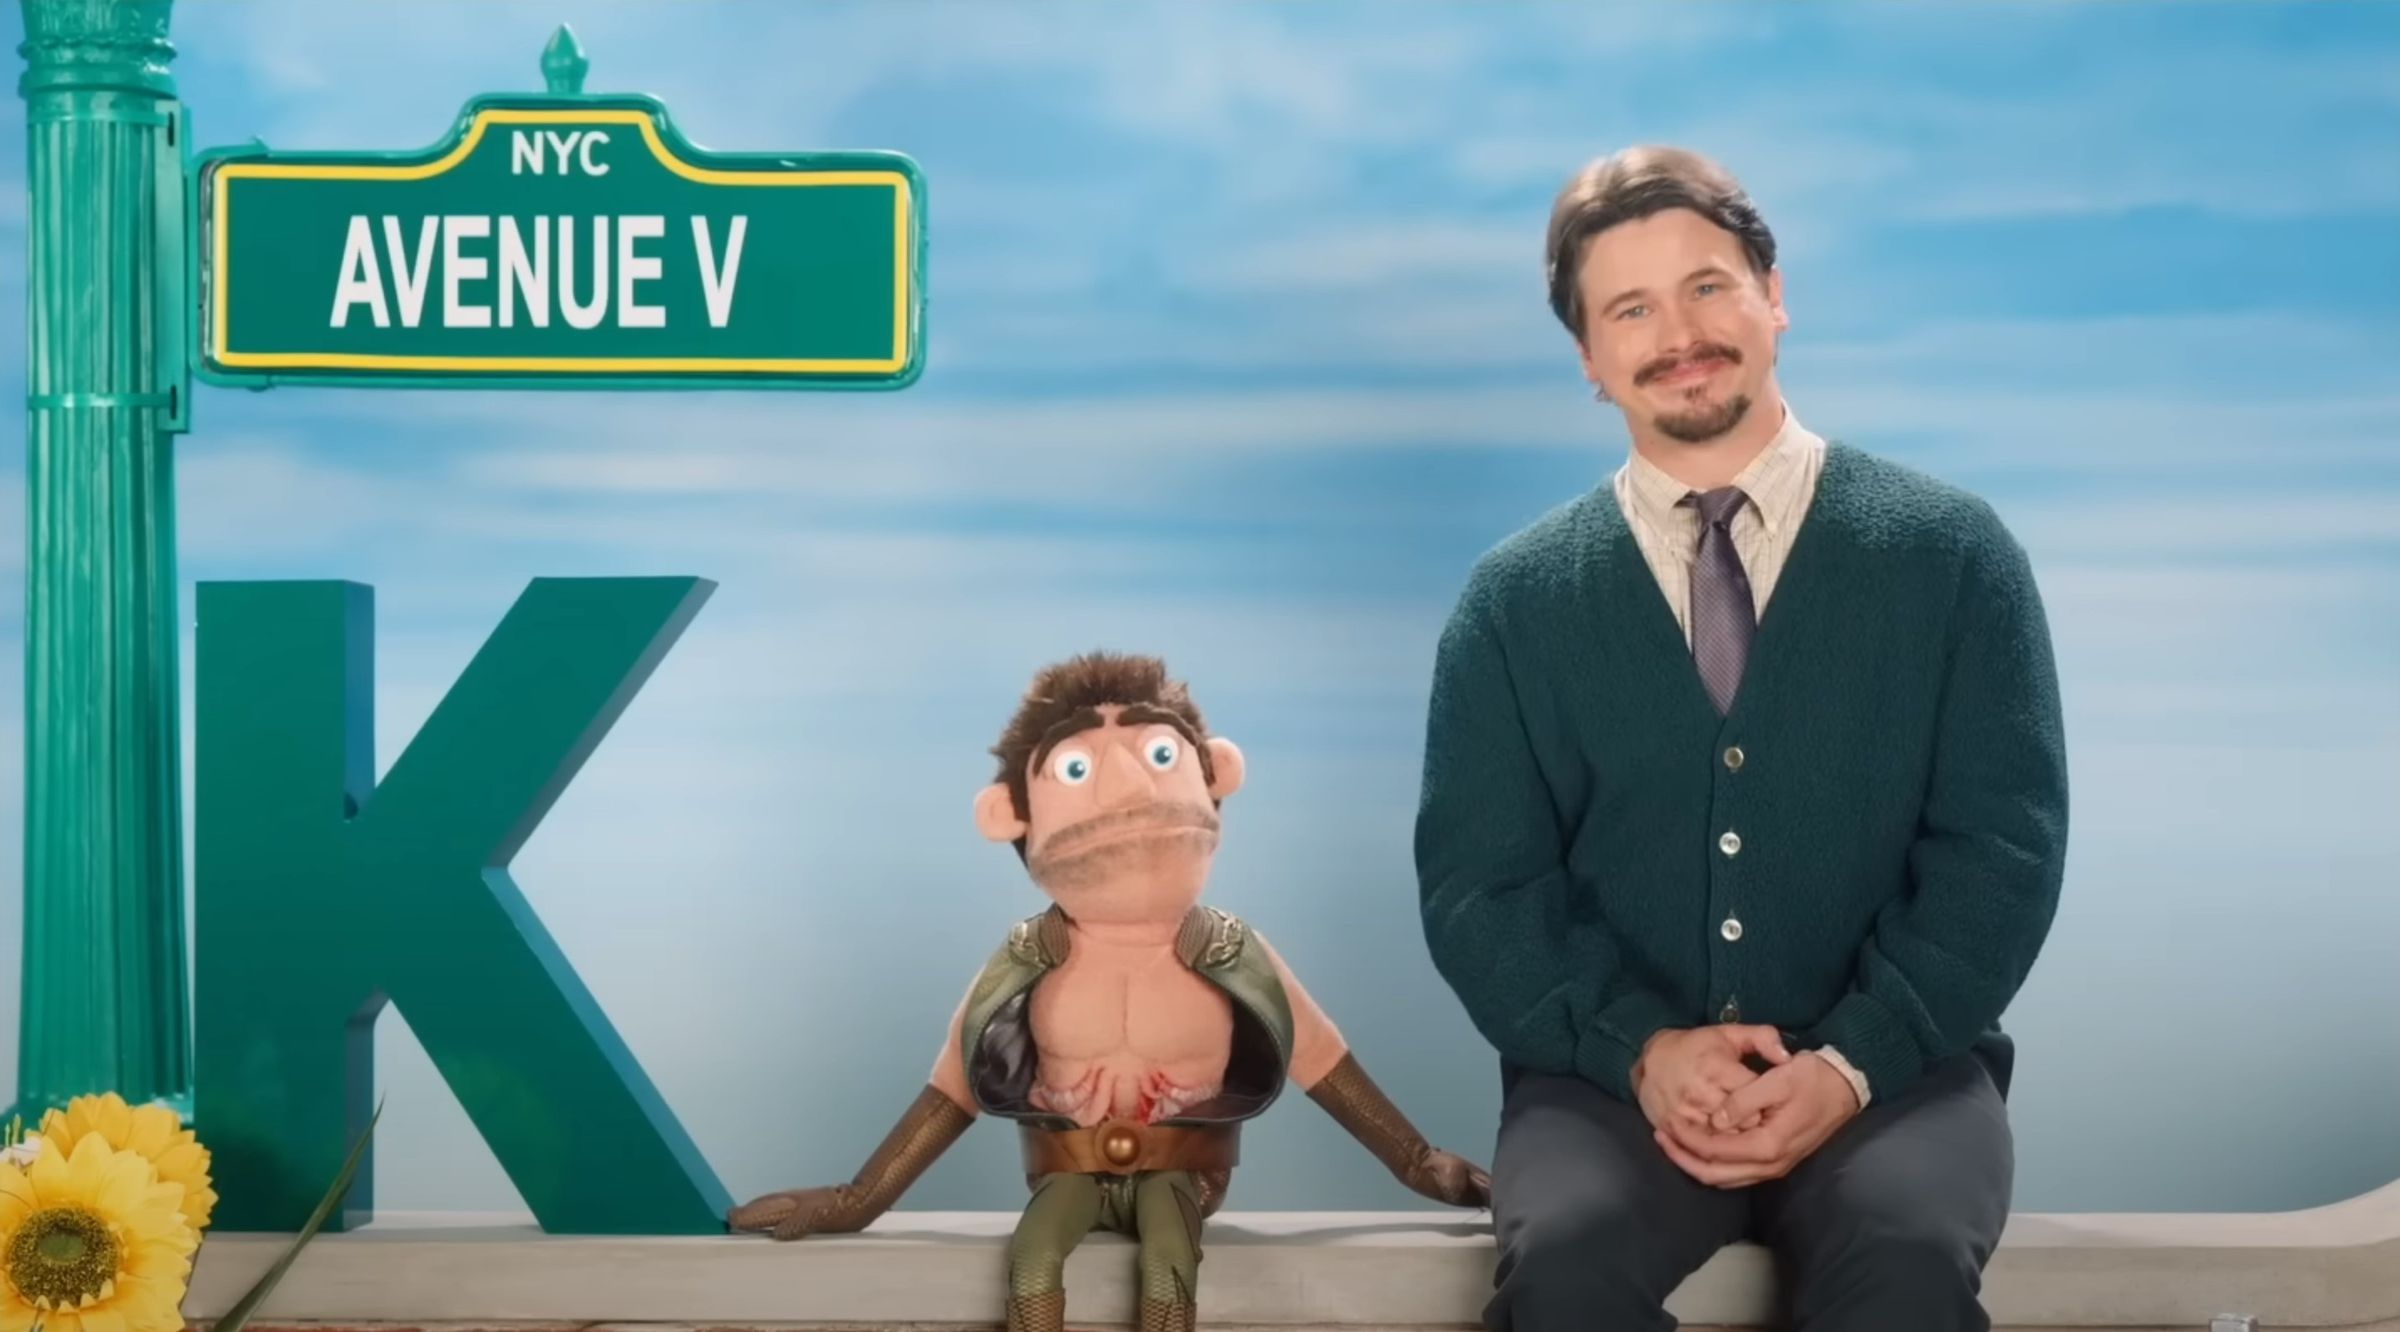 A screenshot taken from the Gen V trailer. A man in a green cardigan is sitting next to a puppet of The Deep from The Boys.